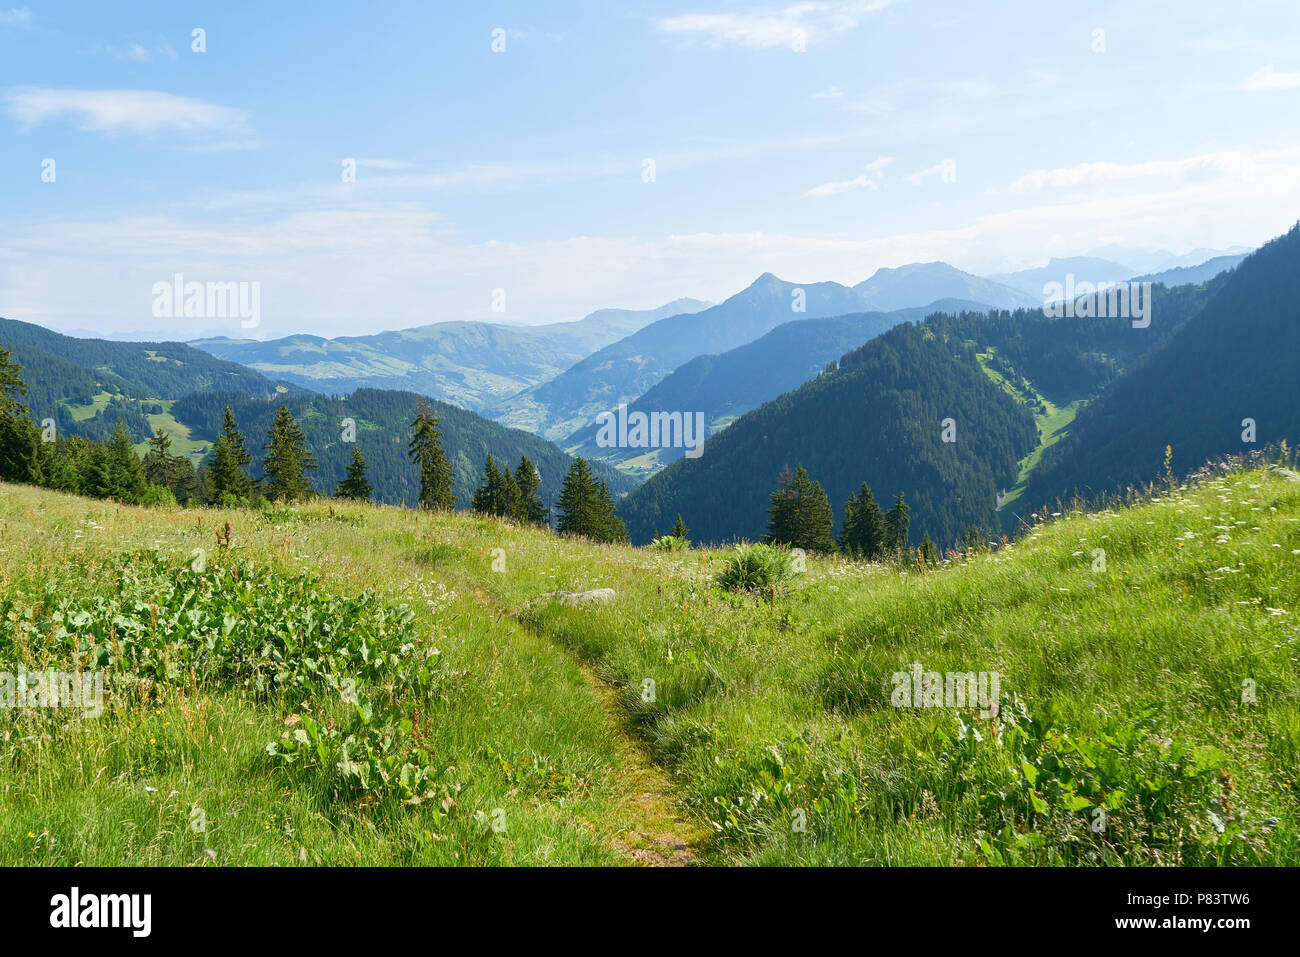 View of French Alps in summer from an alp Stock Photo